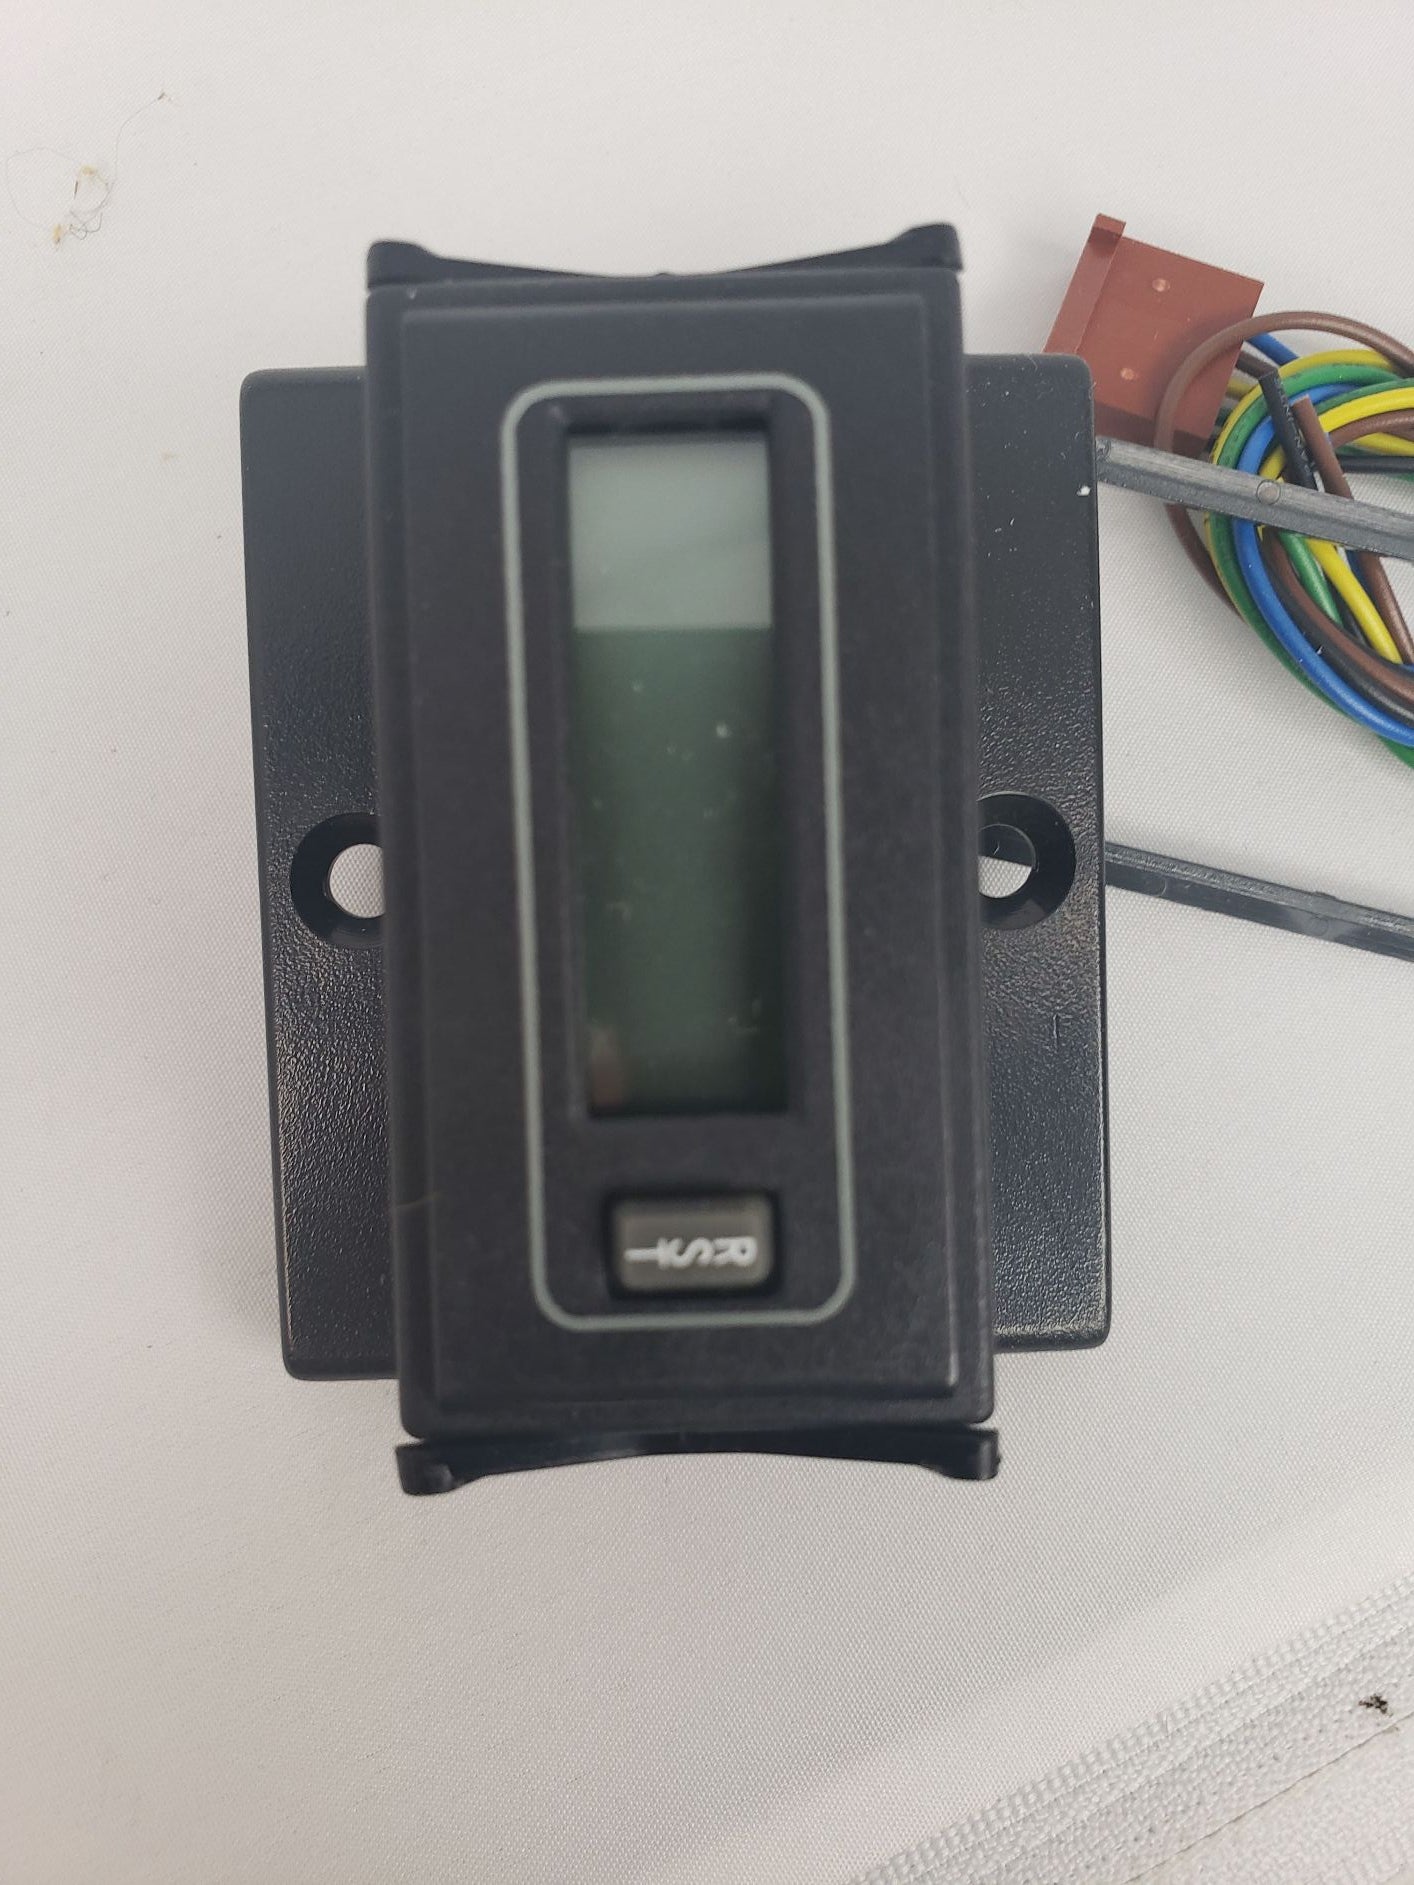 Eaton Durant E42D12475H LCD Electronic Timer Hour Meter